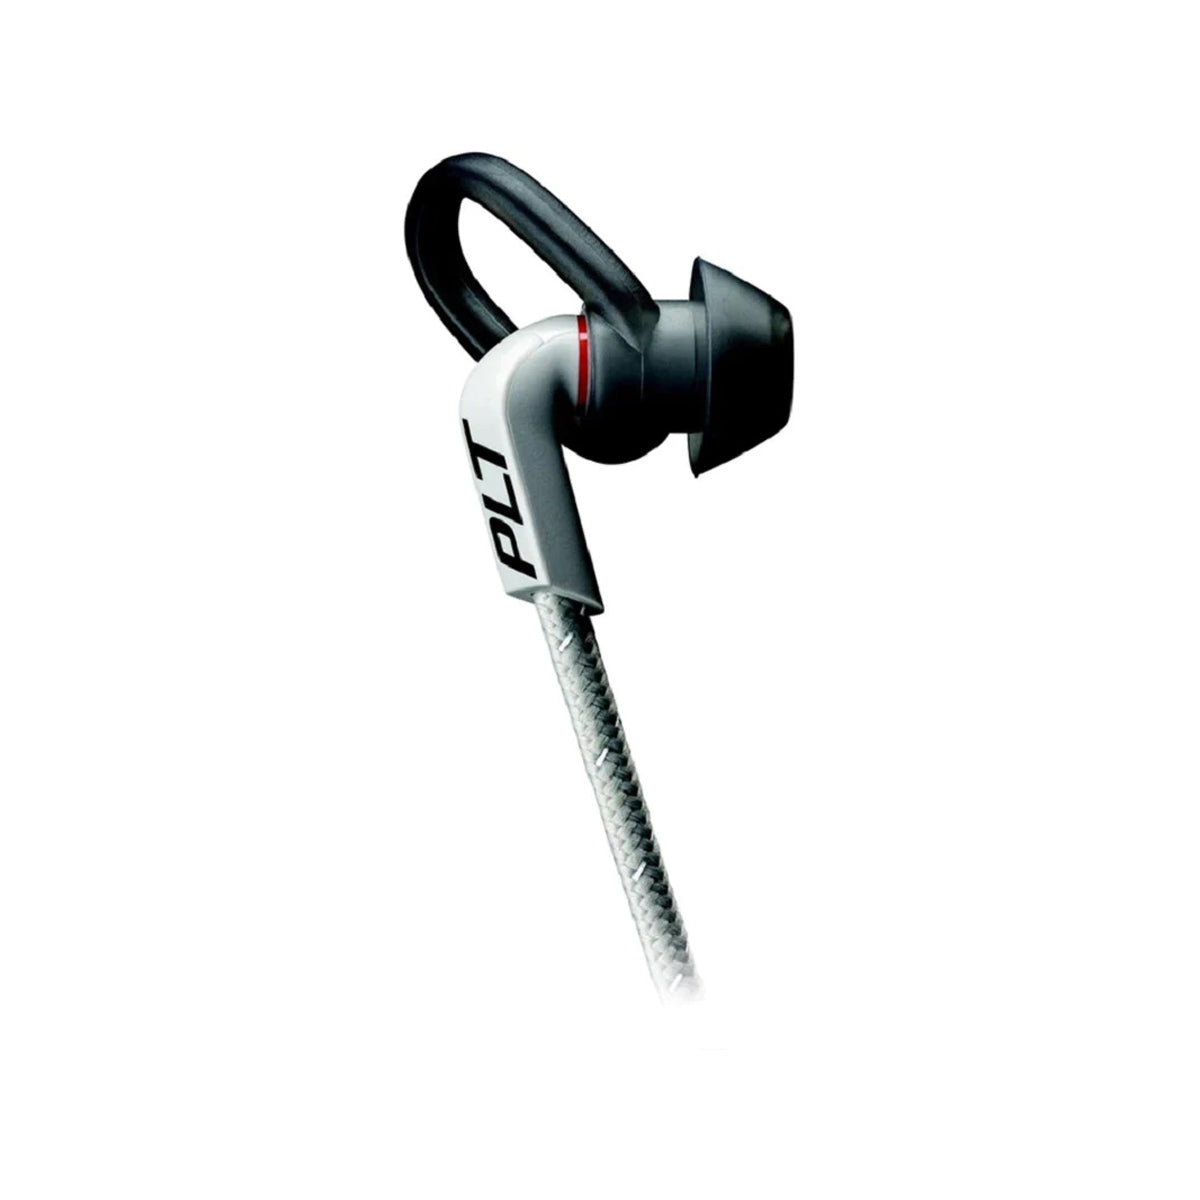 Plantronics BackBeat FIT 305 Wireless Headset for Mobile